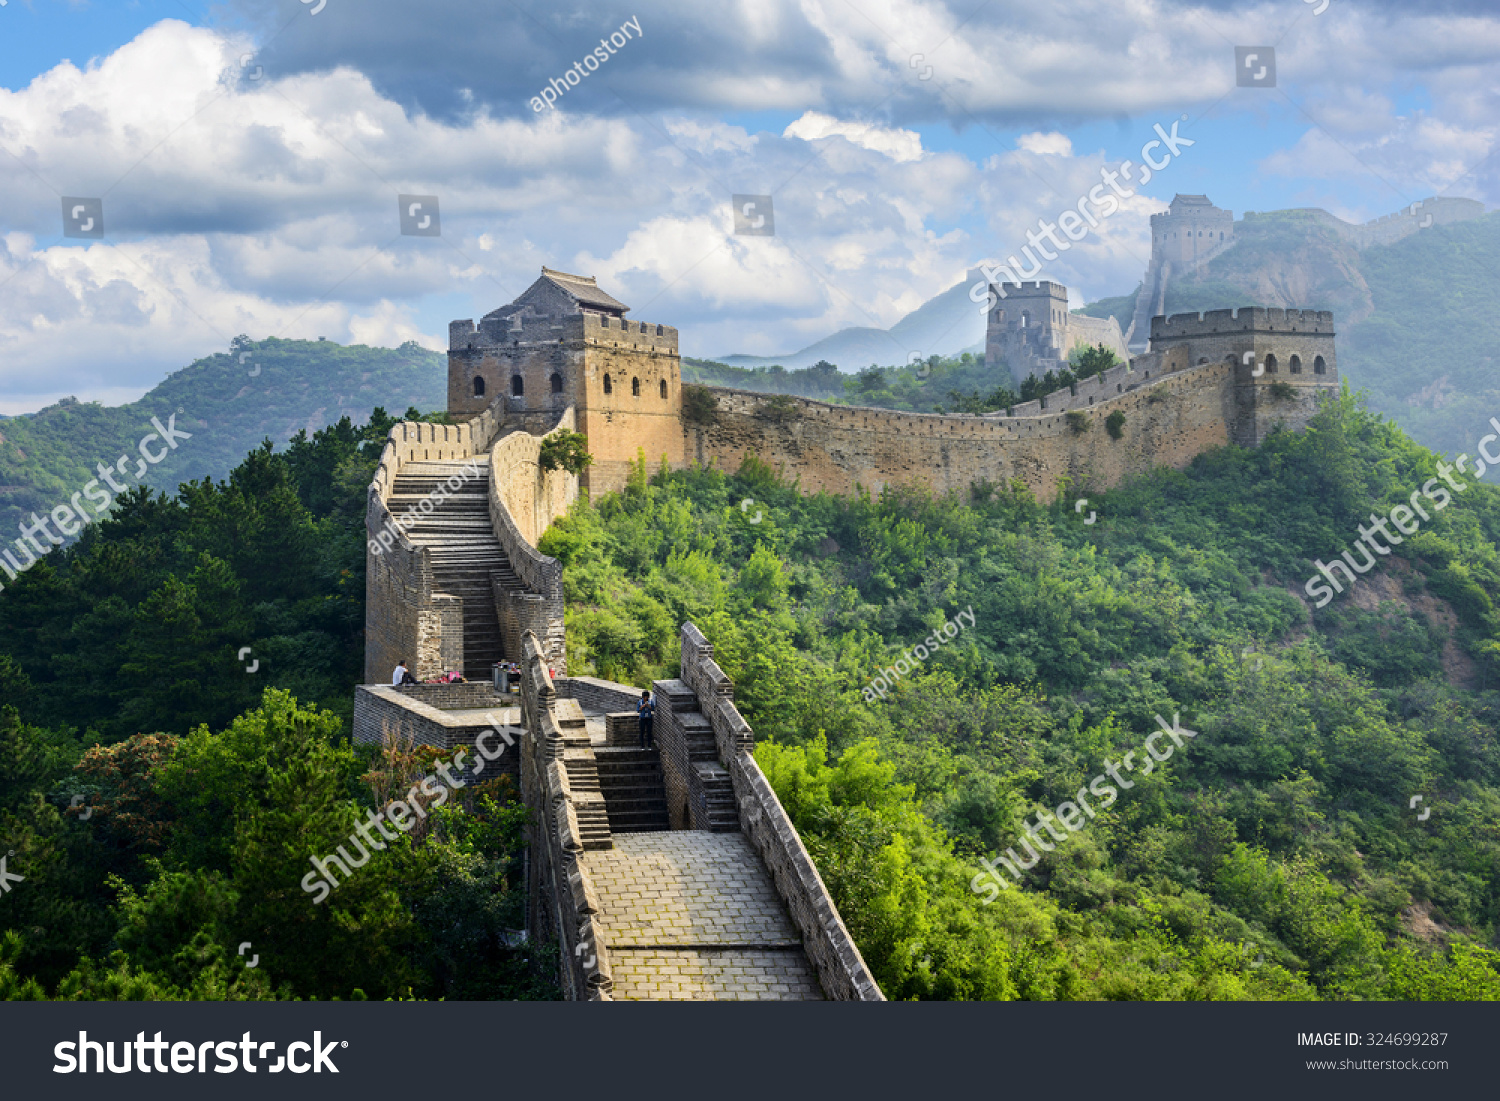 The Great Wall of China. #324699287